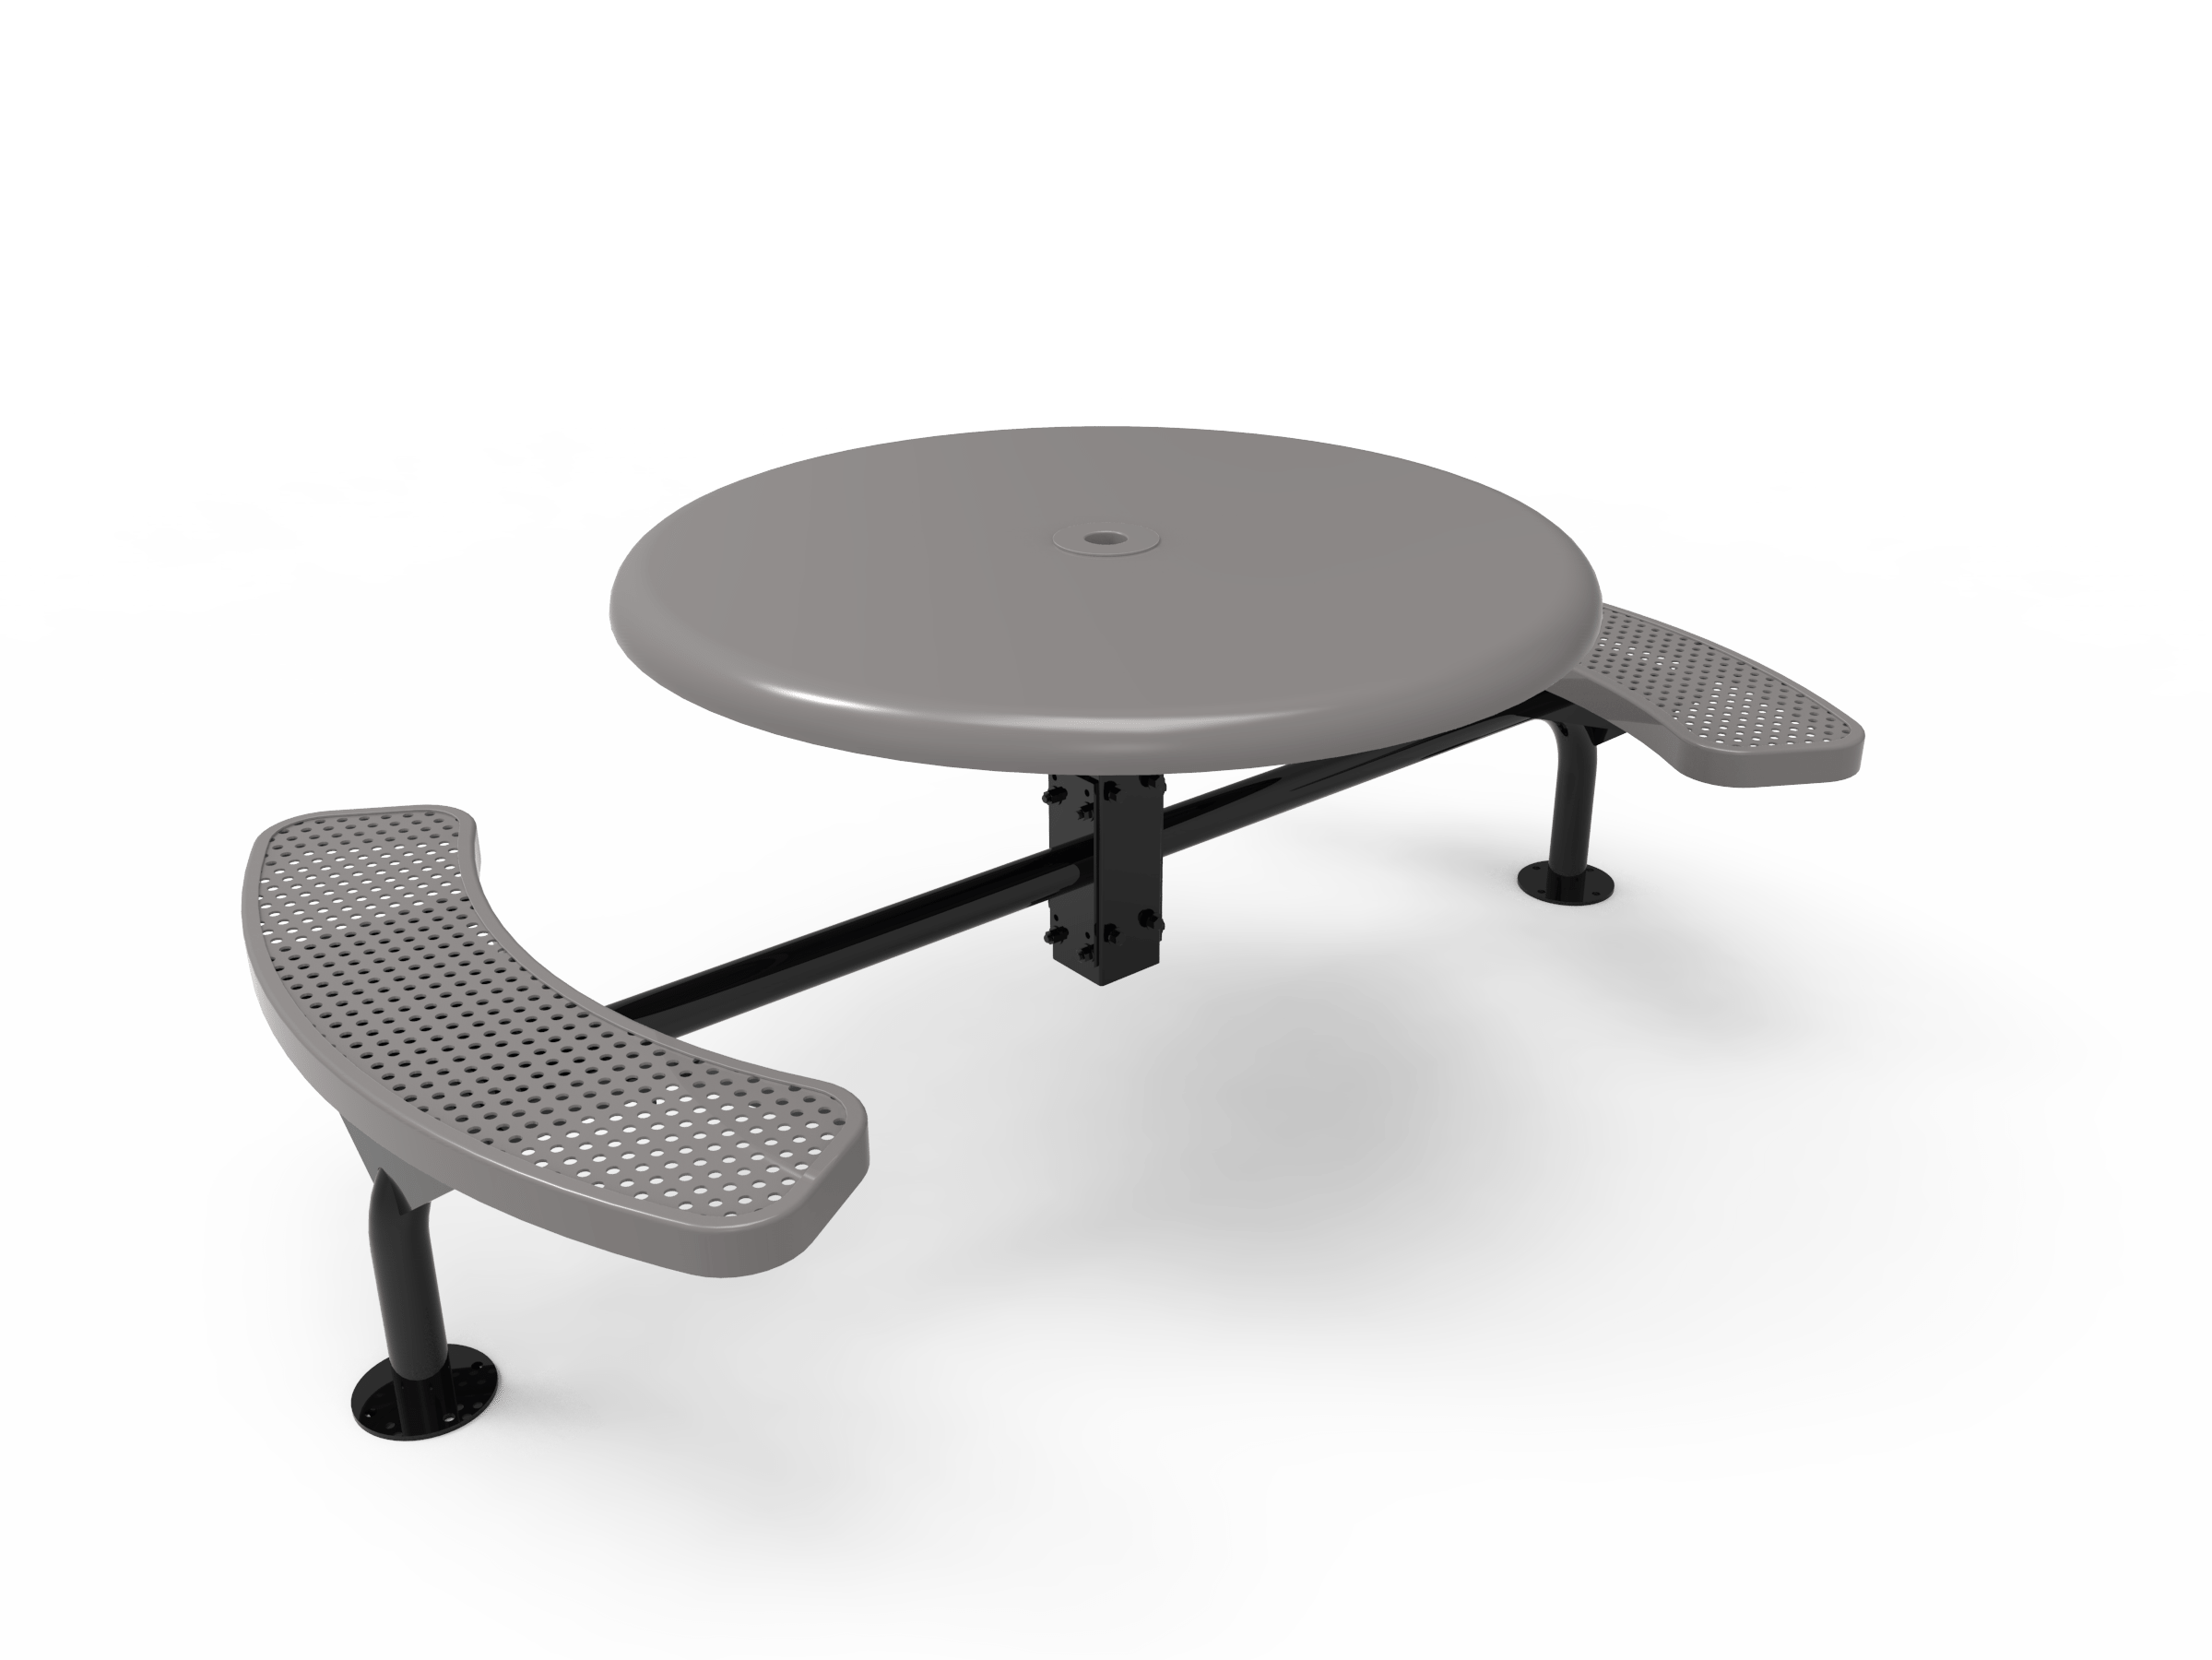 46″ Round Solid Top Nexus Surface Table With 2 Seats-Punched
TRS46-D-52-012
Industry Standard Finish
$1849.00
TRS46-B-52-012
Advantage Premium Finish
$2339.00
